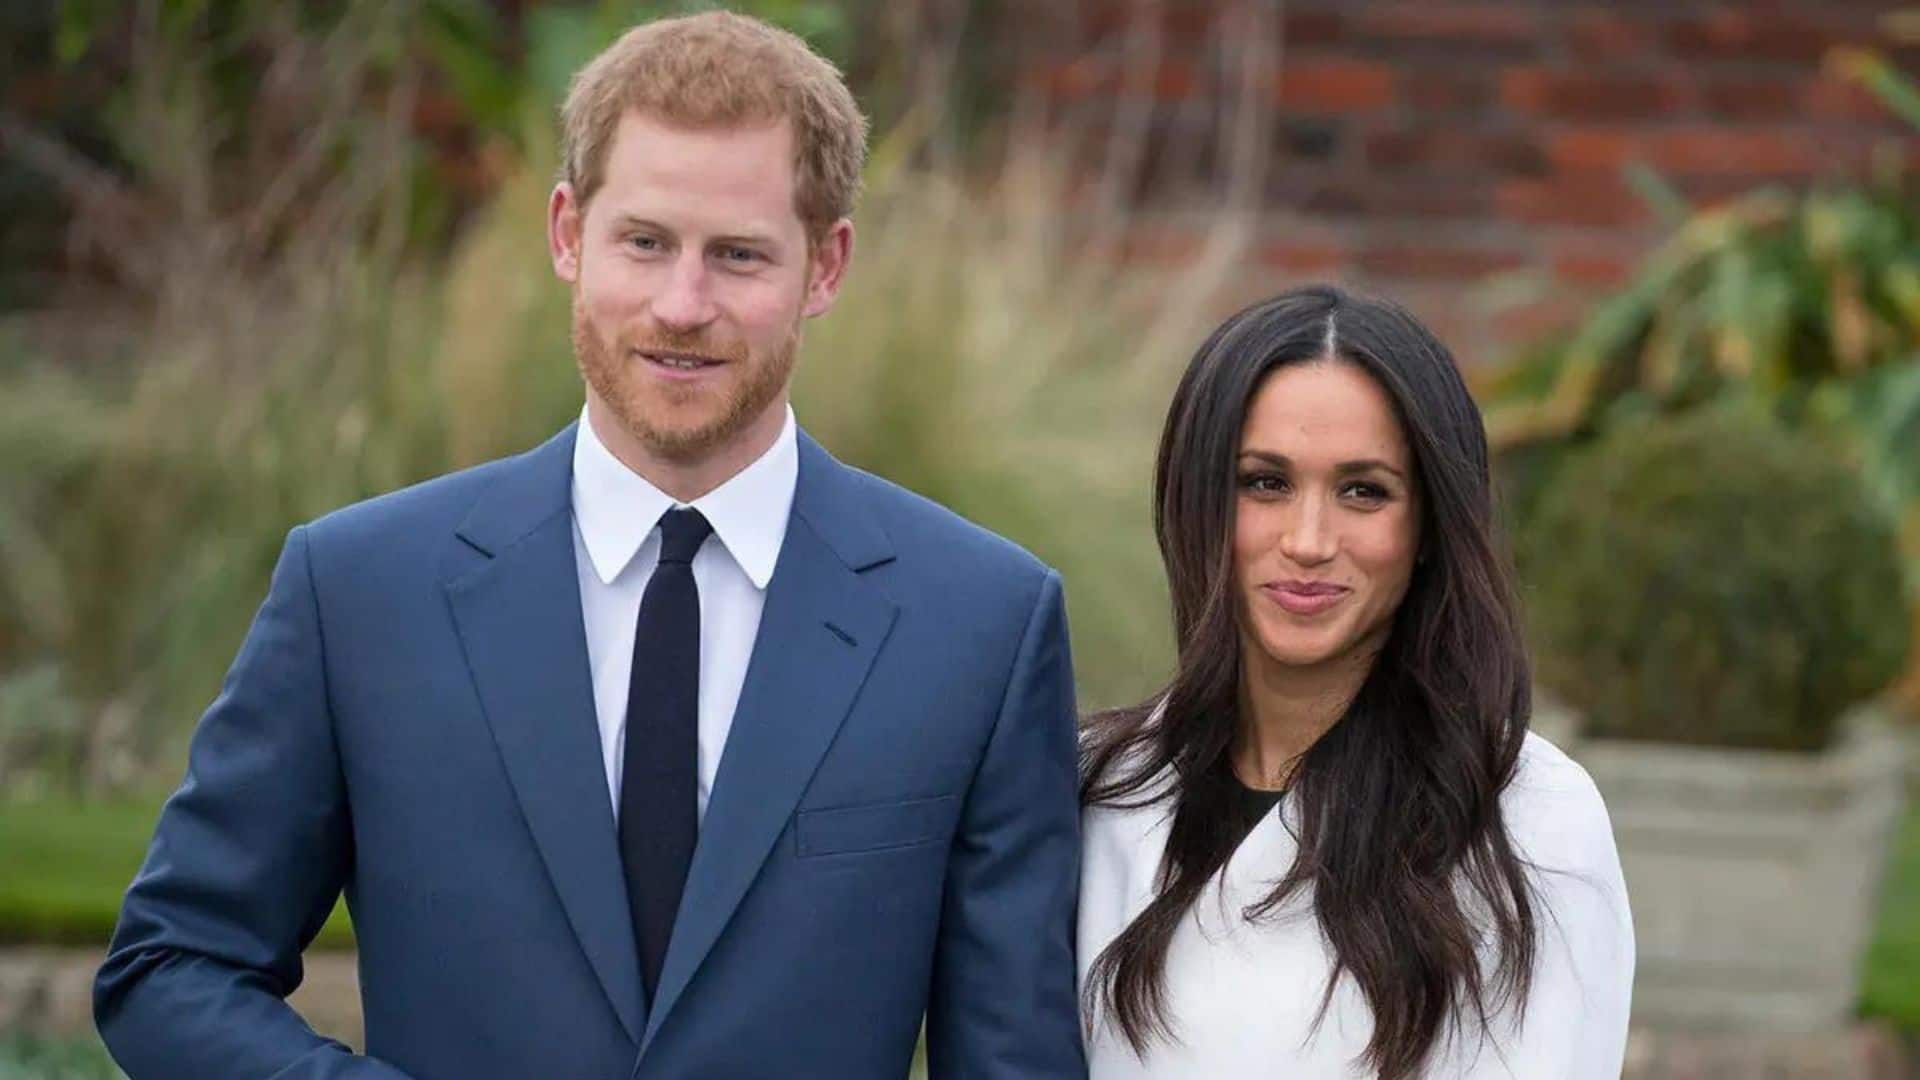 Meghan Markle and Prince Harry extend monetary support to Ukraine